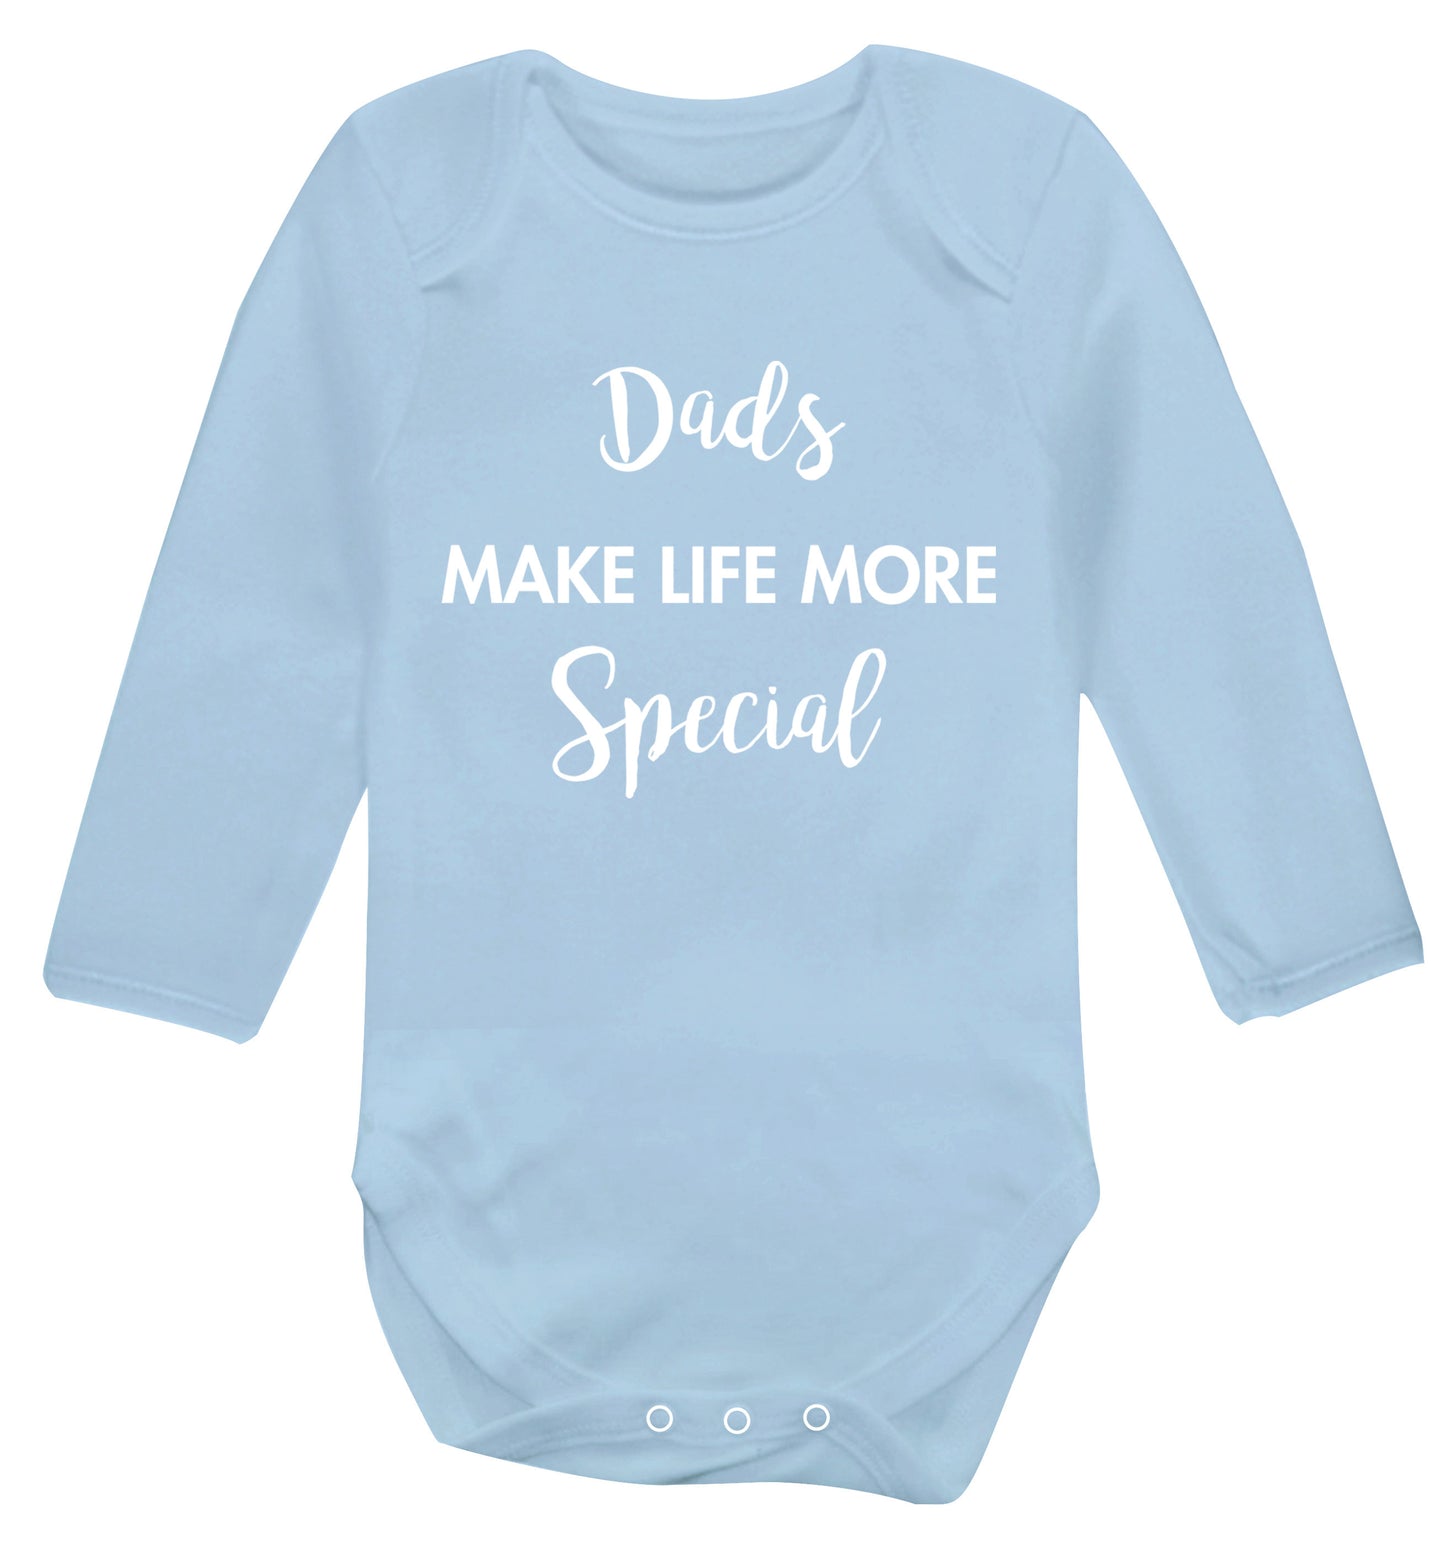 Dads make life more special Baby Vest long sleeved pale blue 6-12 months